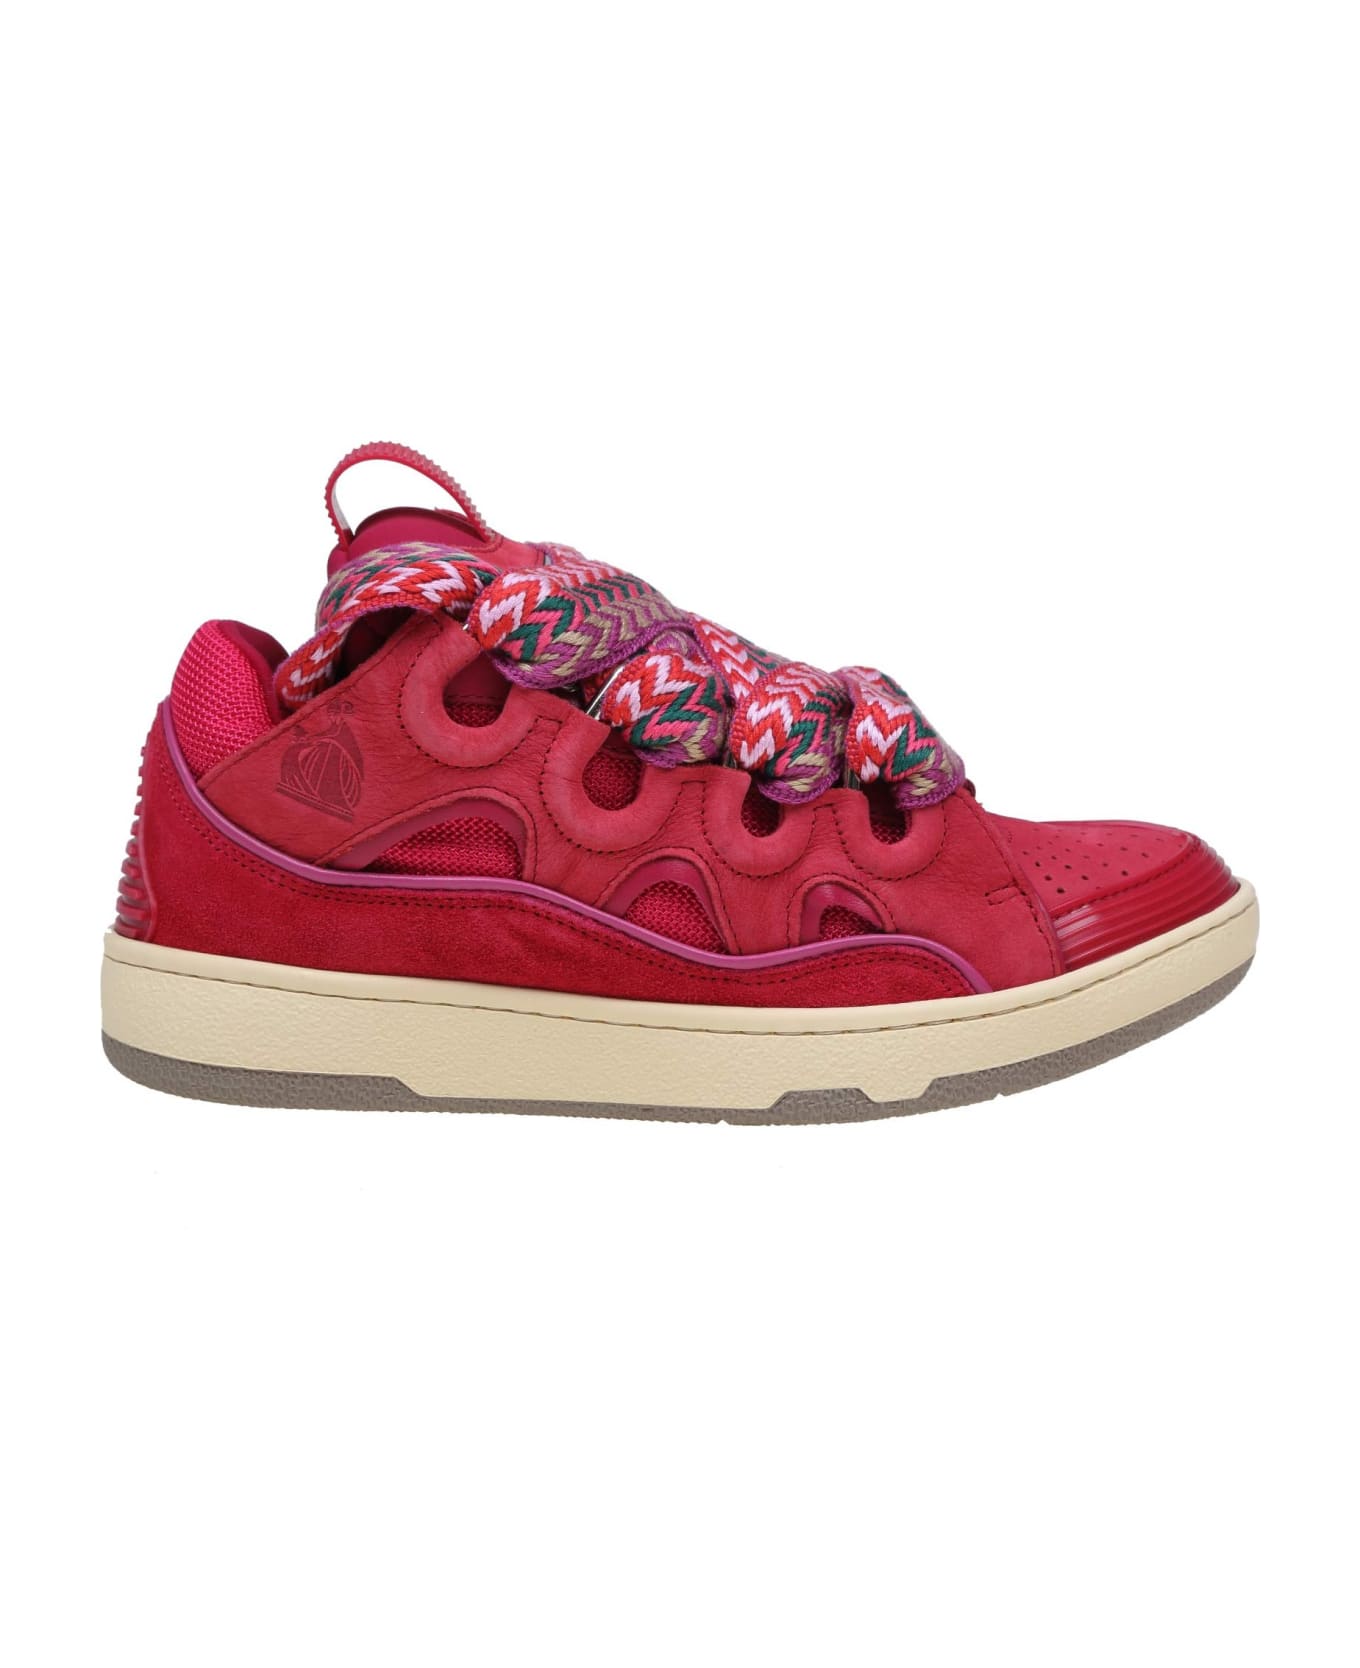 Lanvin Curb Sneakers In Suede And Watermelon Color Fabric - Watermelon スニーカー